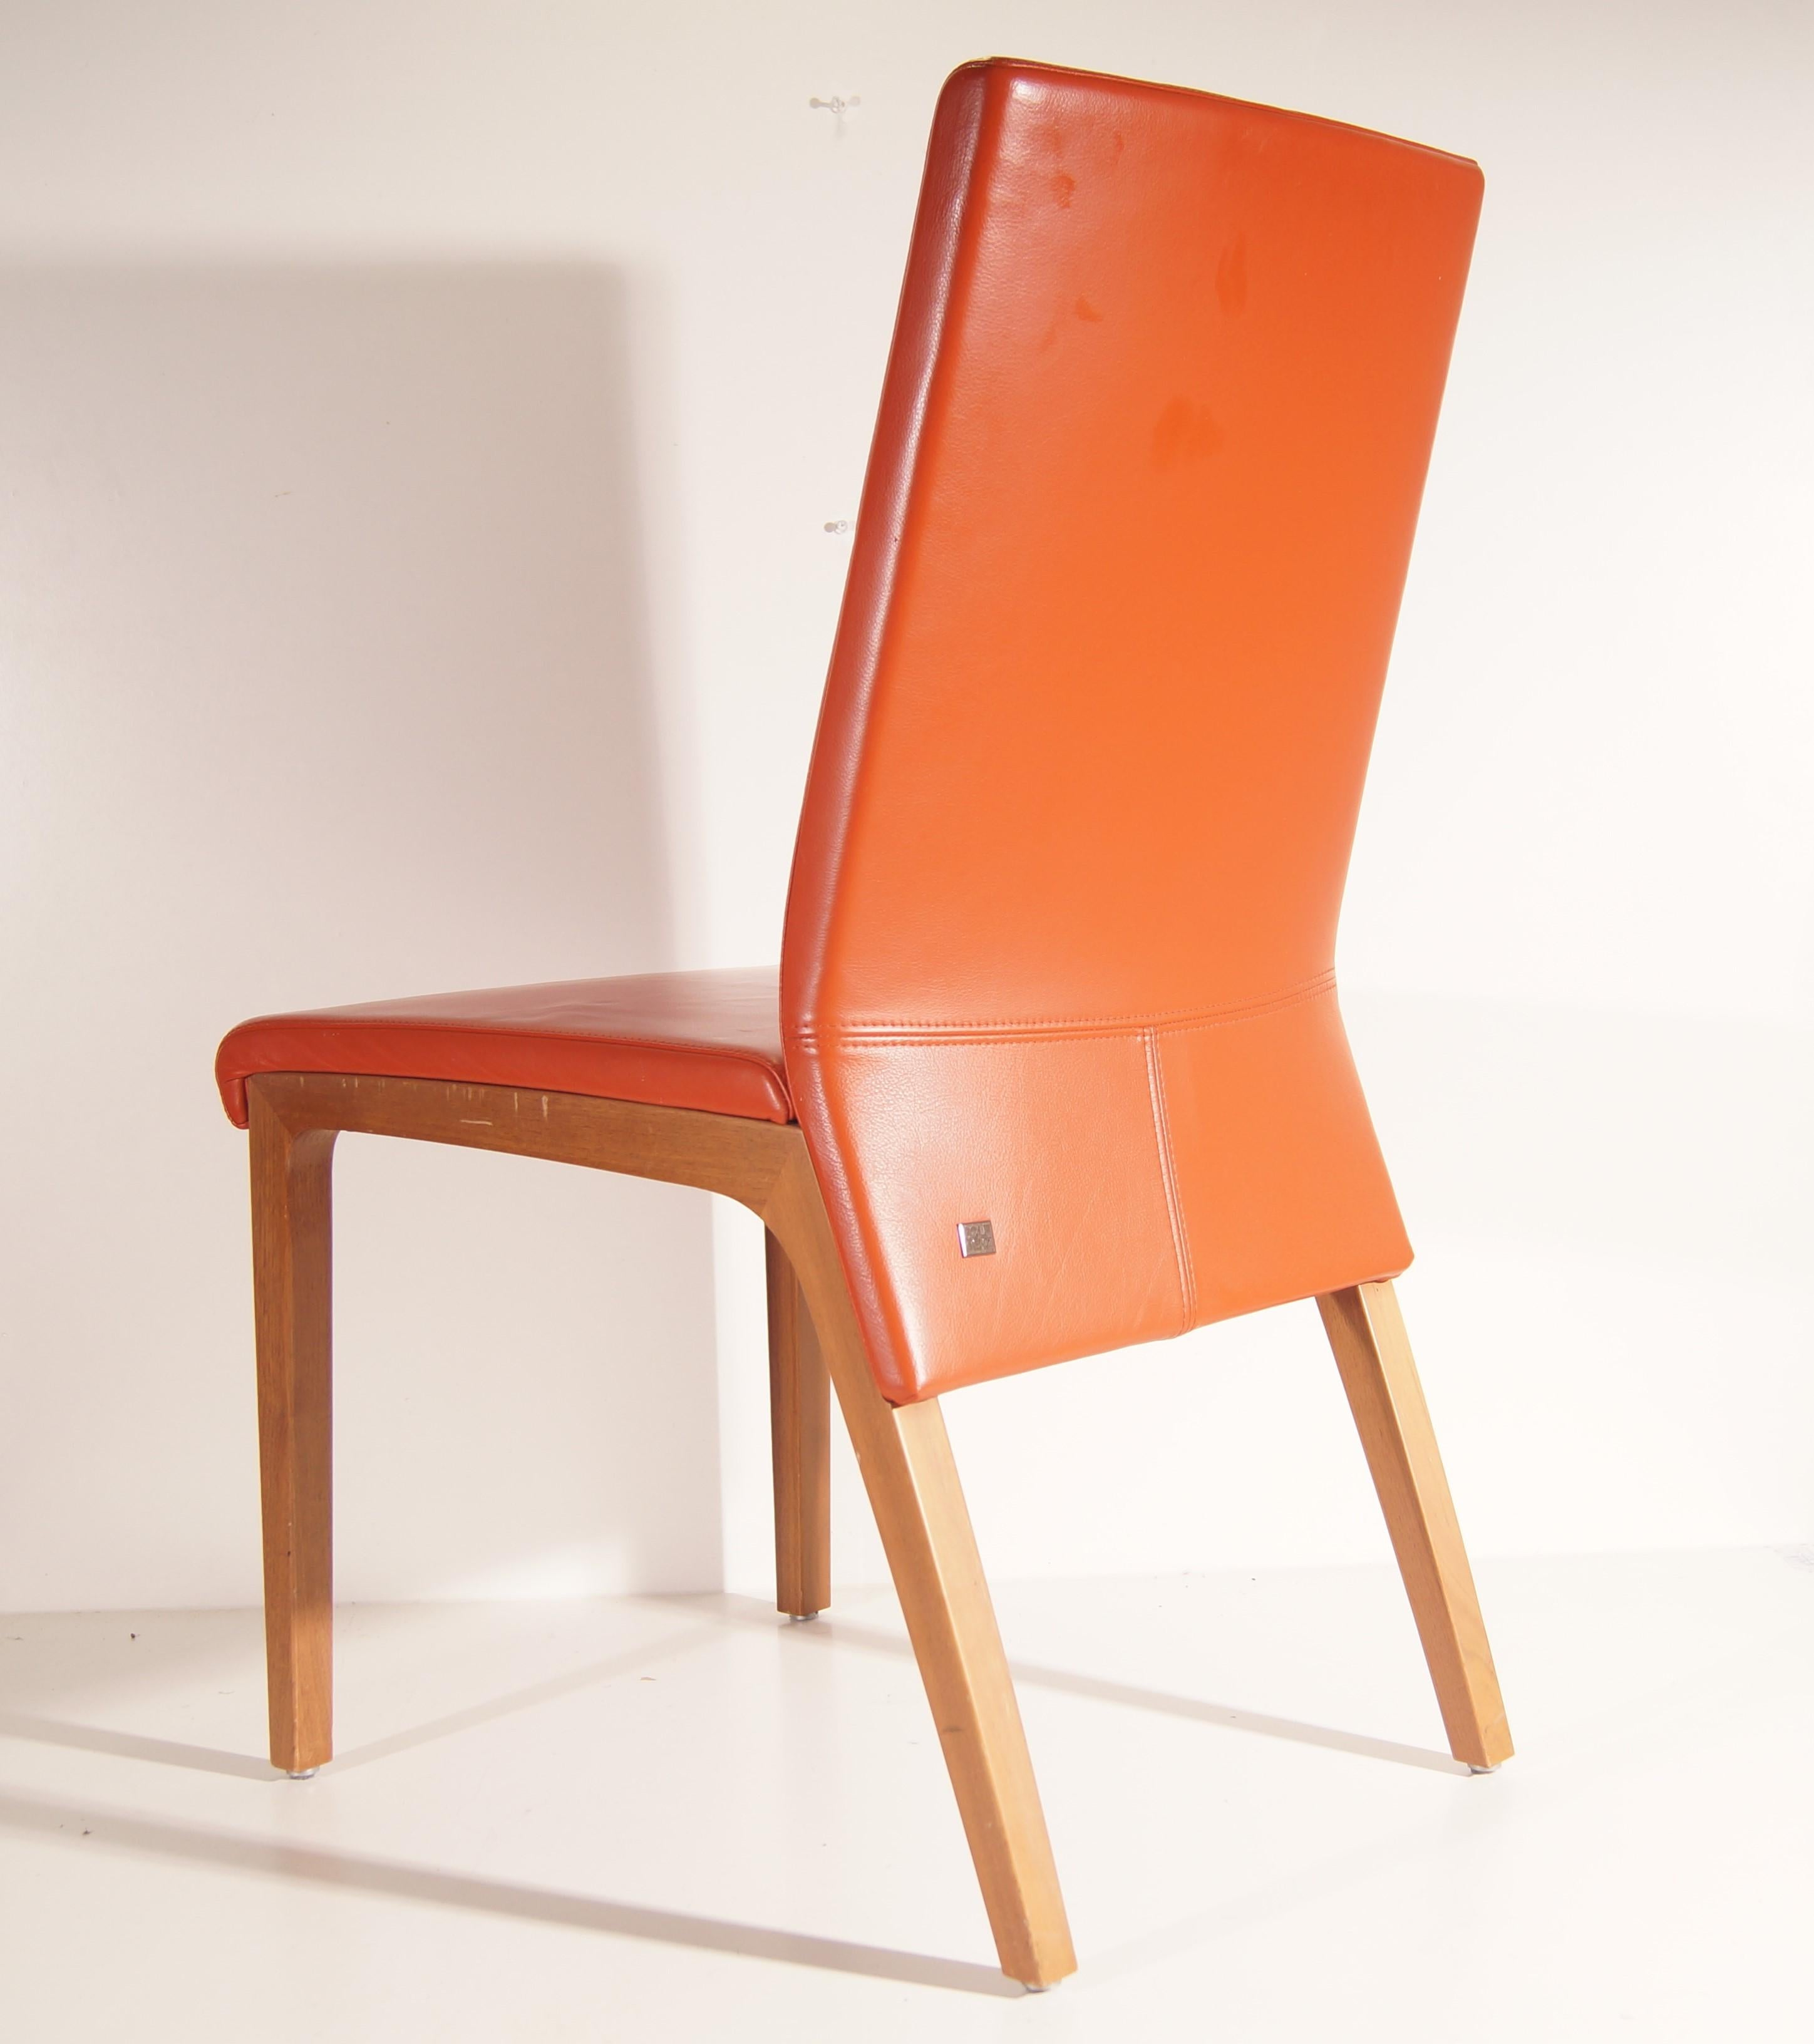 Modern Rolf Benz - Dining room chair in orange leather